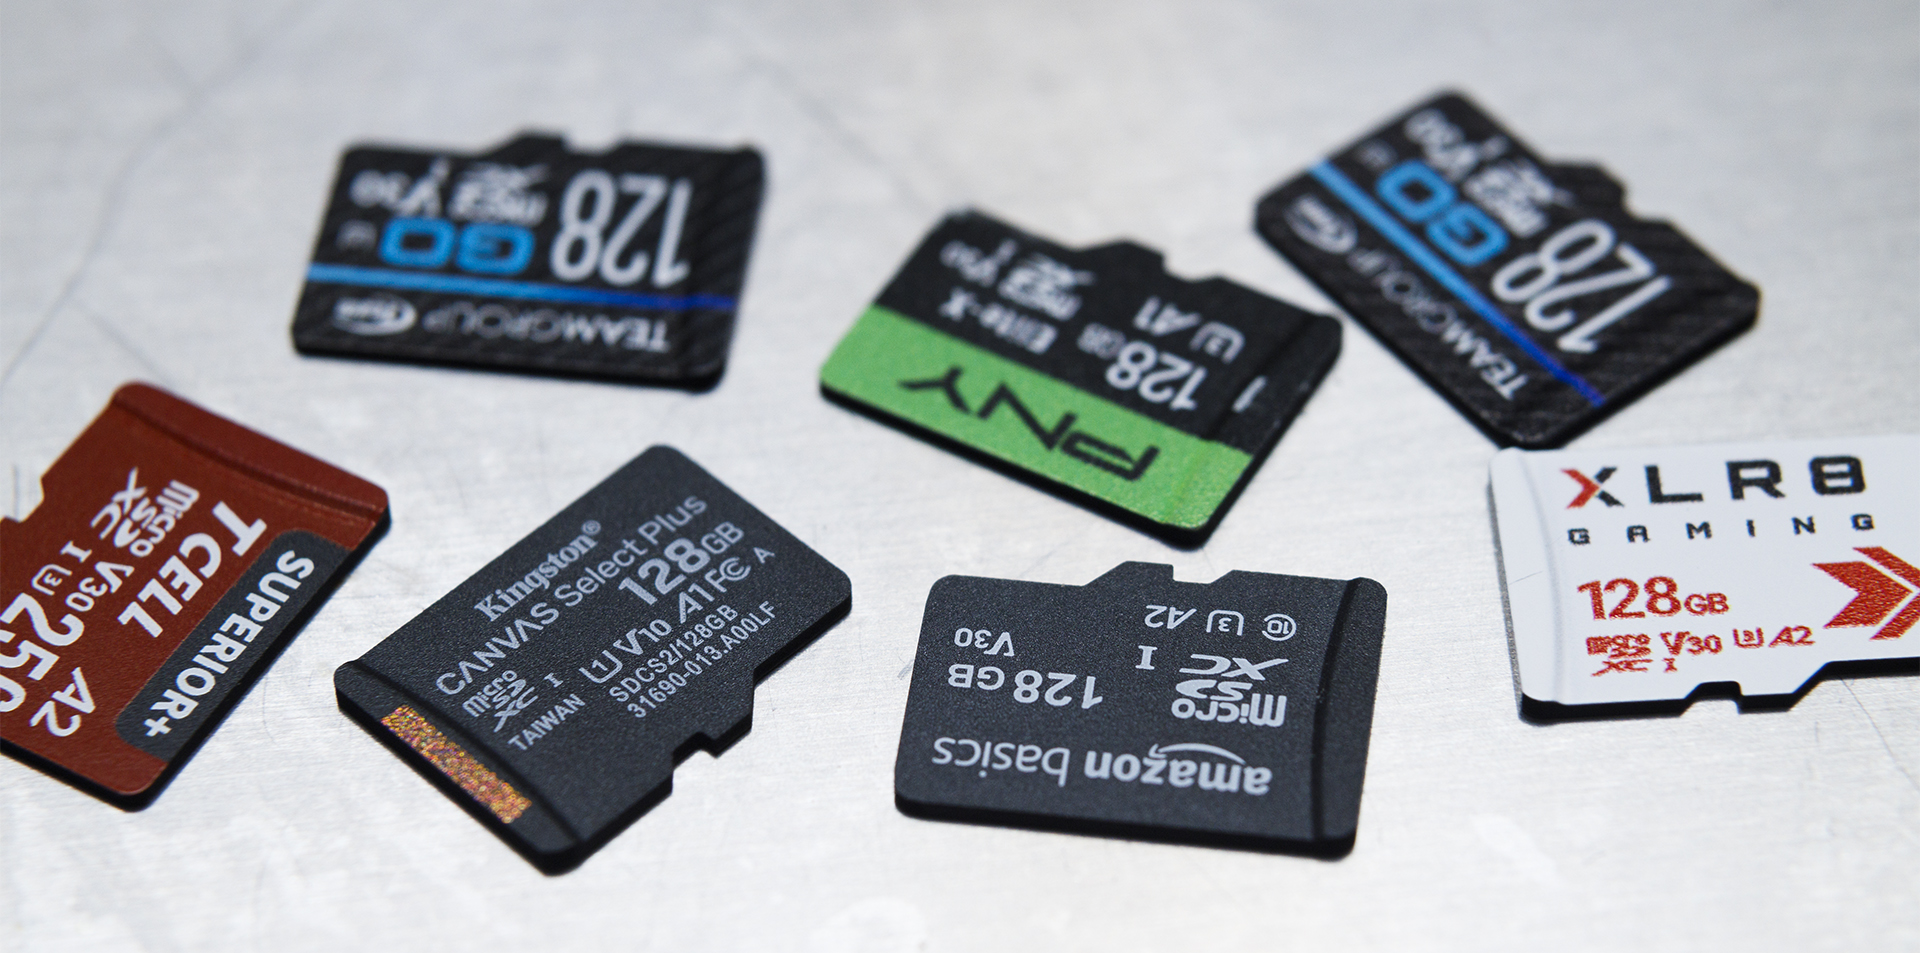 6 - 128GB Class 3 V30 Micro SD cards compared and reviewed